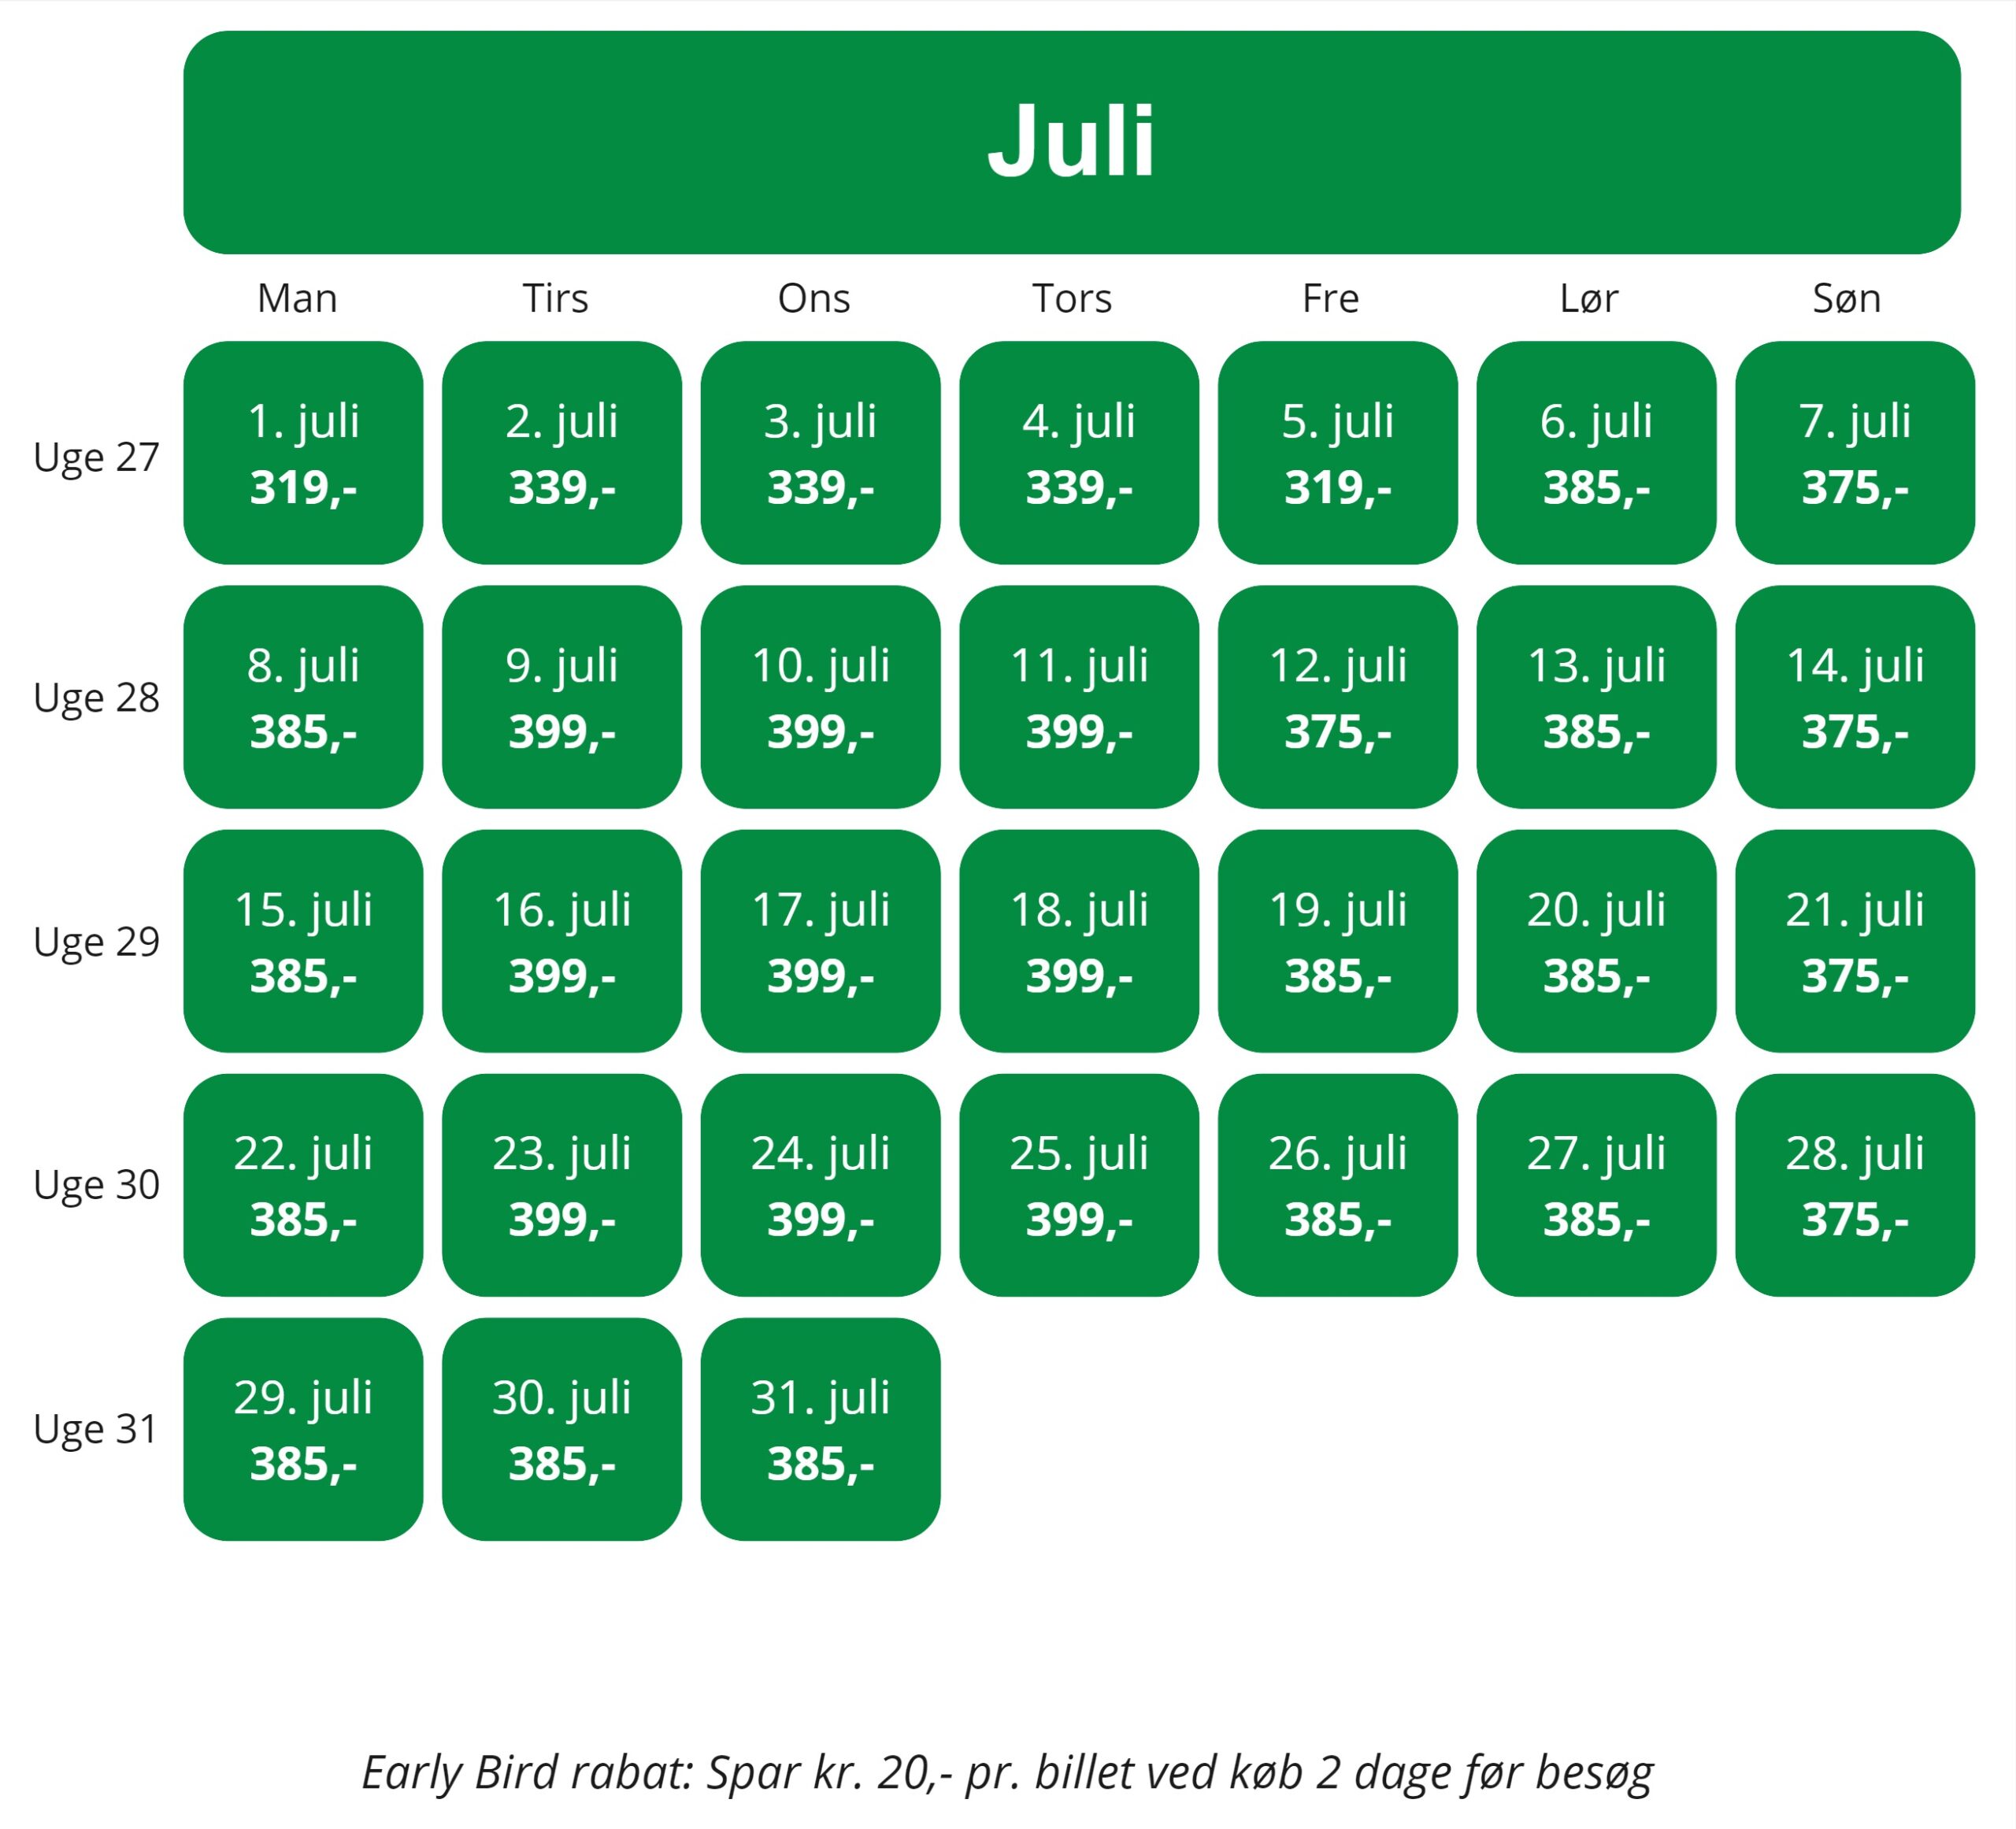 prices_july